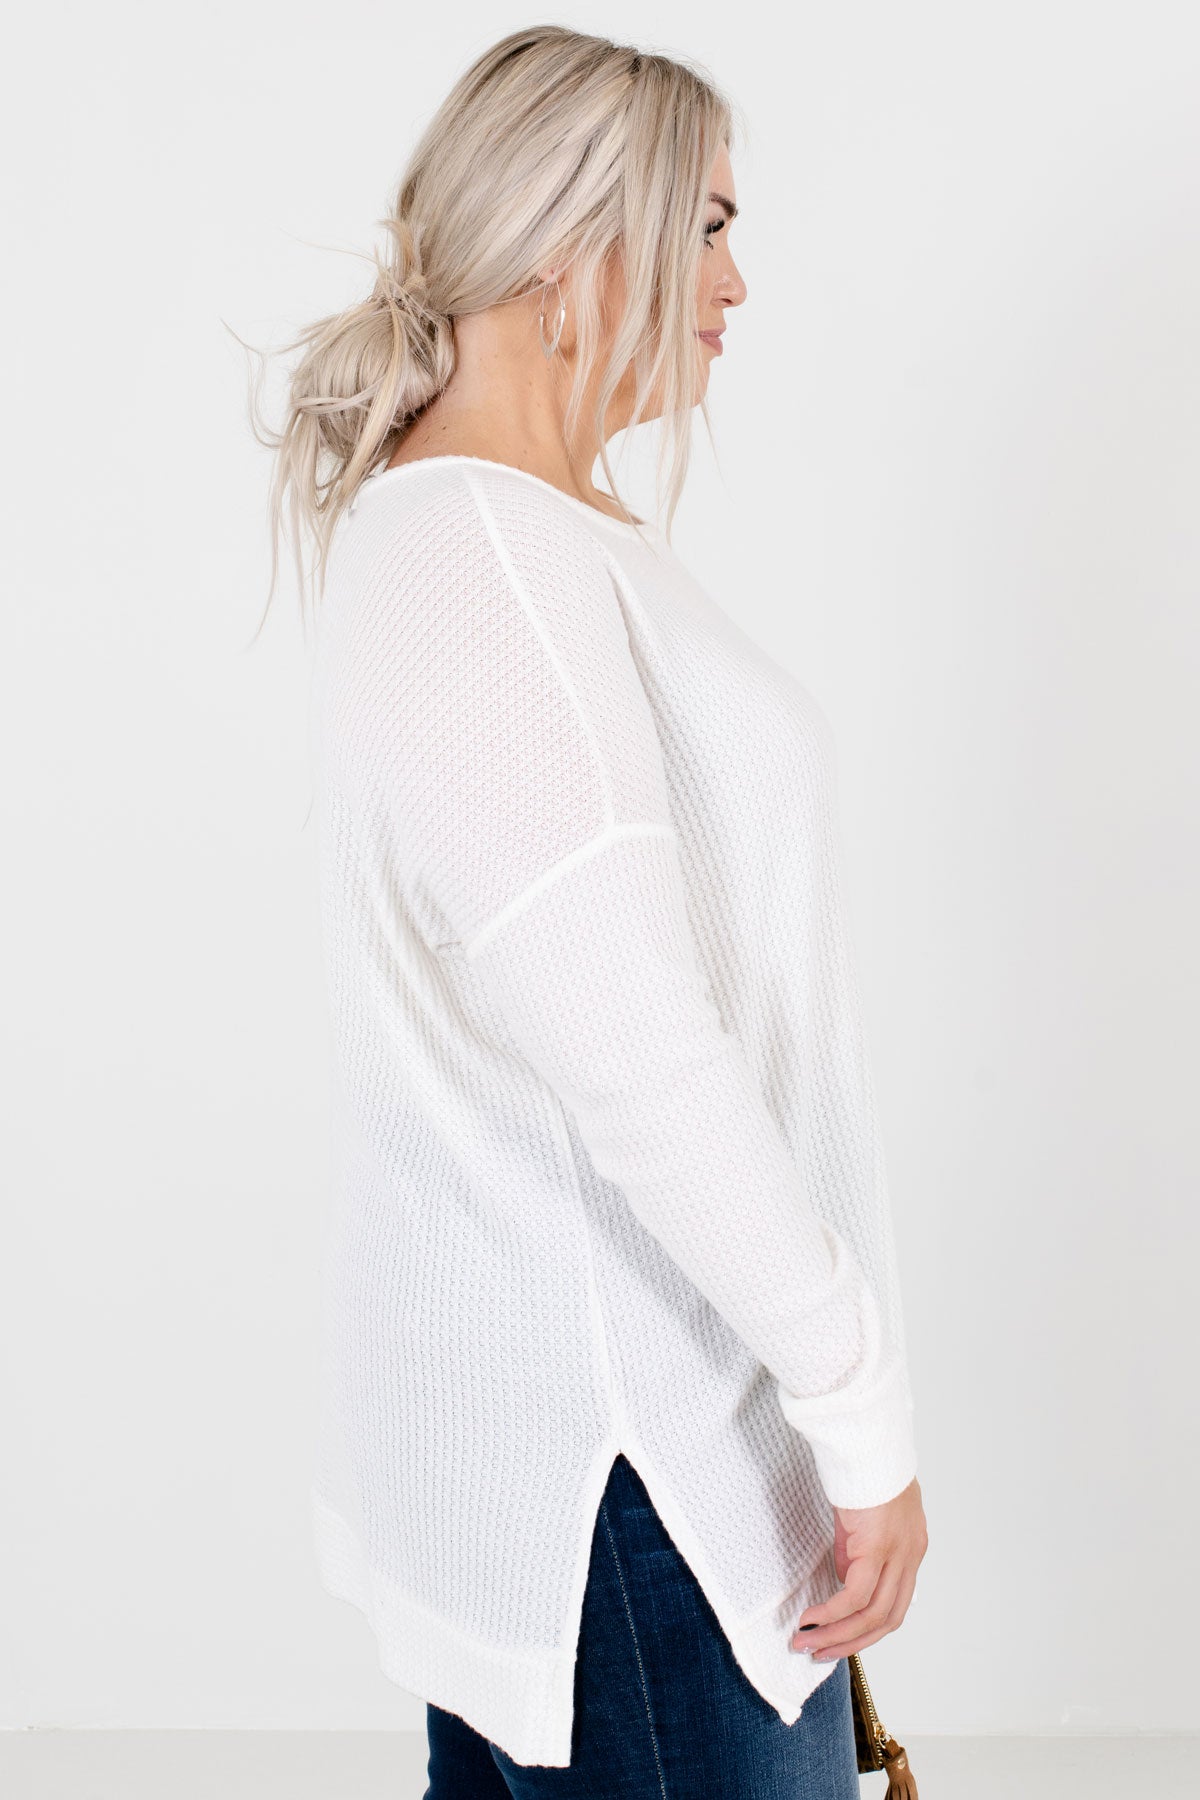 White Long Sleeve Boutique Tops for Women